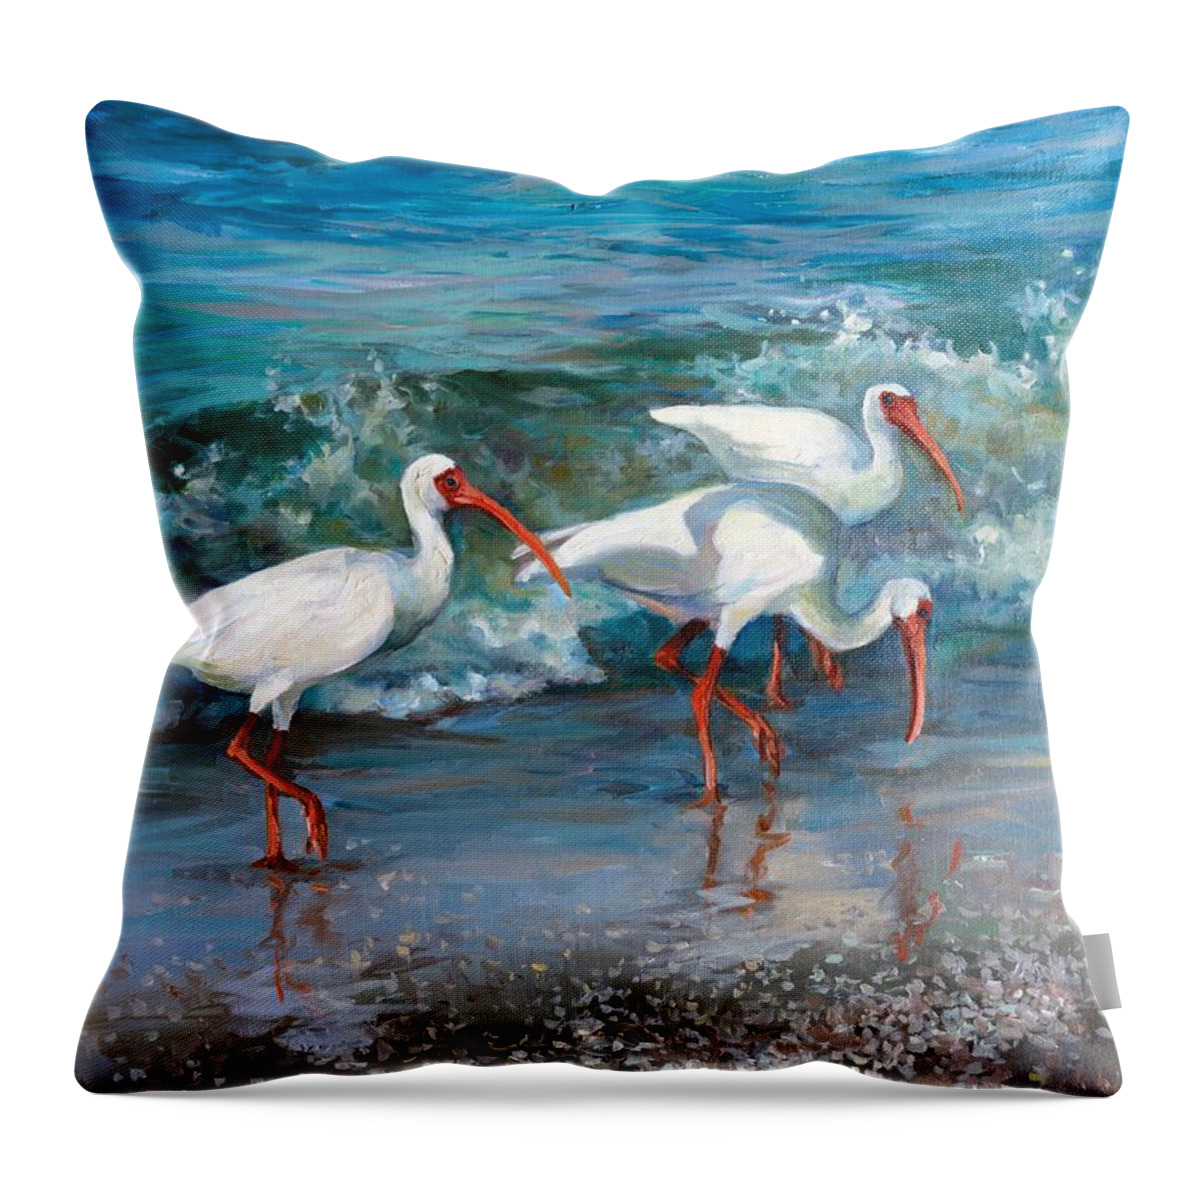 Ibis Throw Pillow featuring the painting Ibis Trio by Laurie Snow Hein